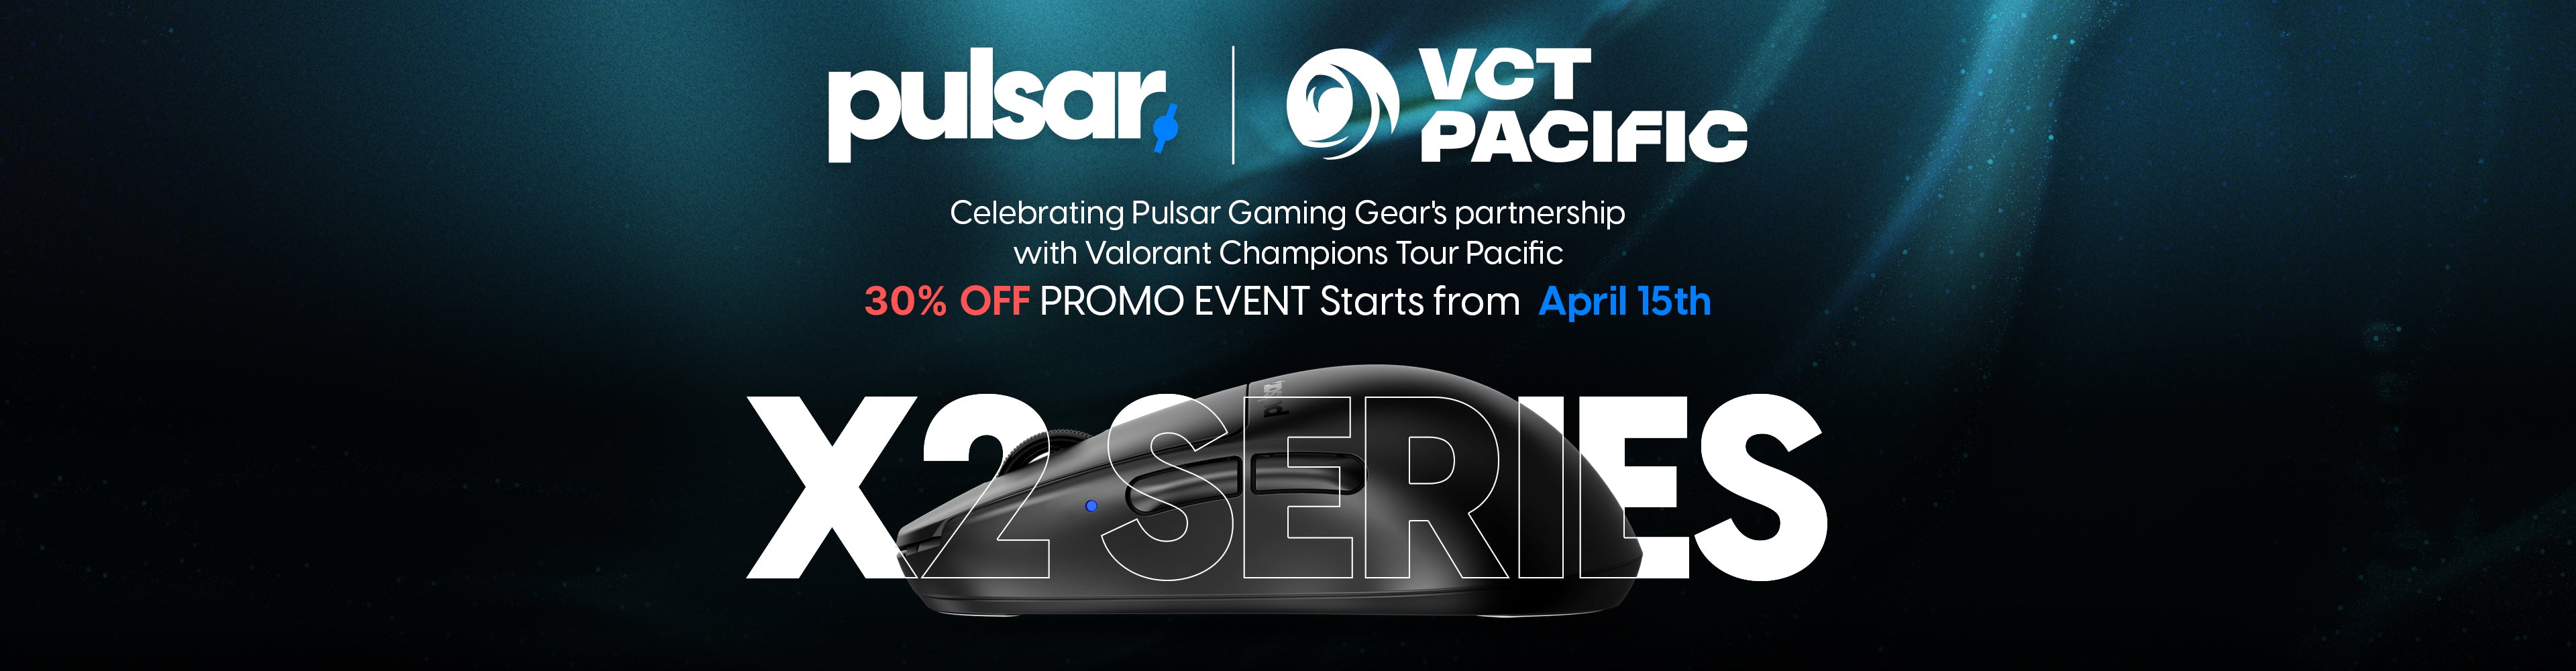 Pulsar x VCT pacific 2024 official partner